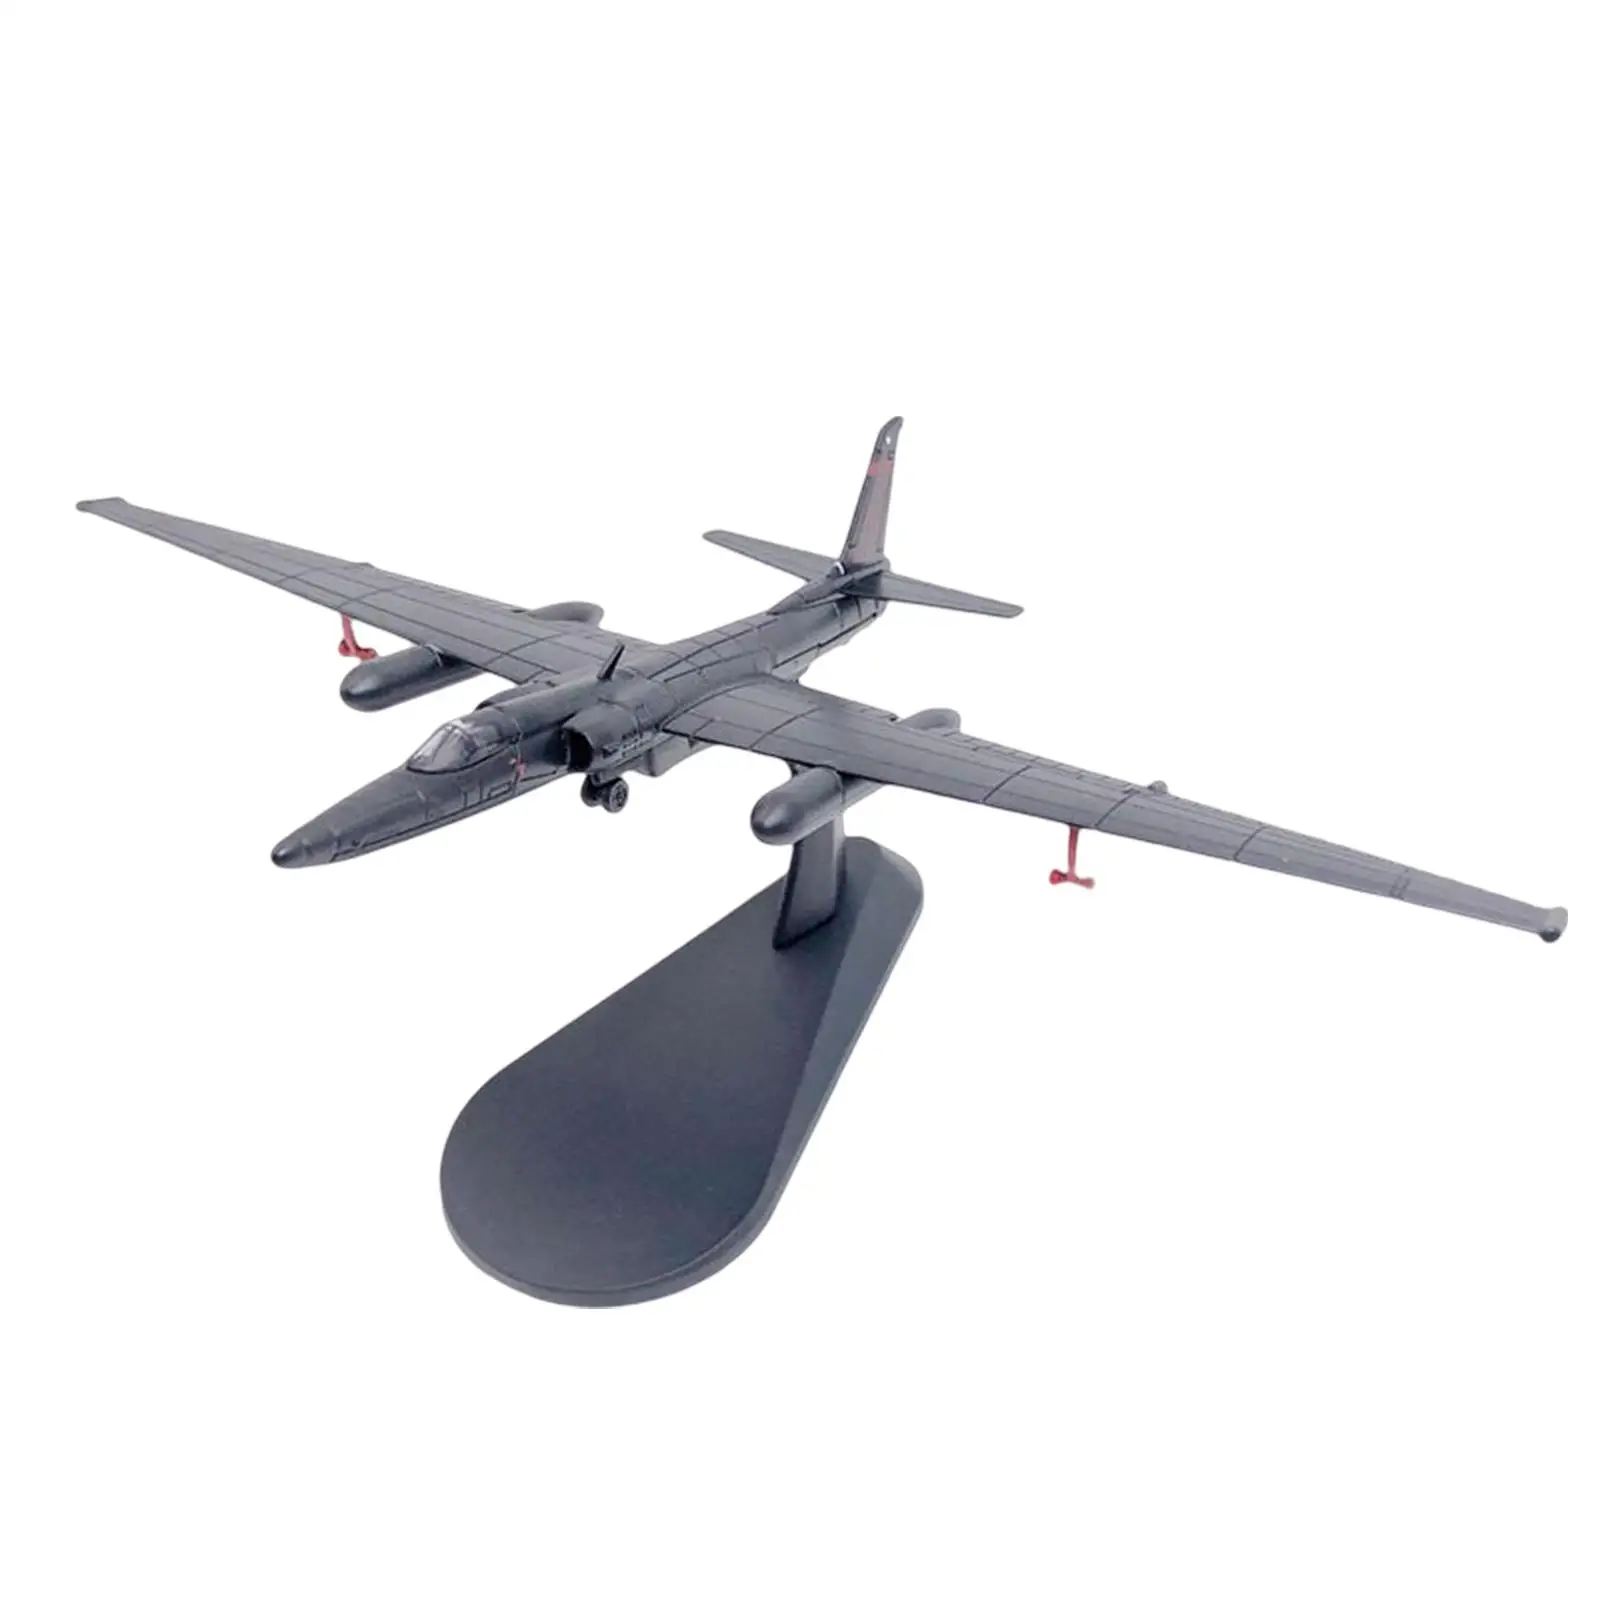 1/144 U2 Reconnaissance Aircraft Model with Display Stand, Decoration Collectibles